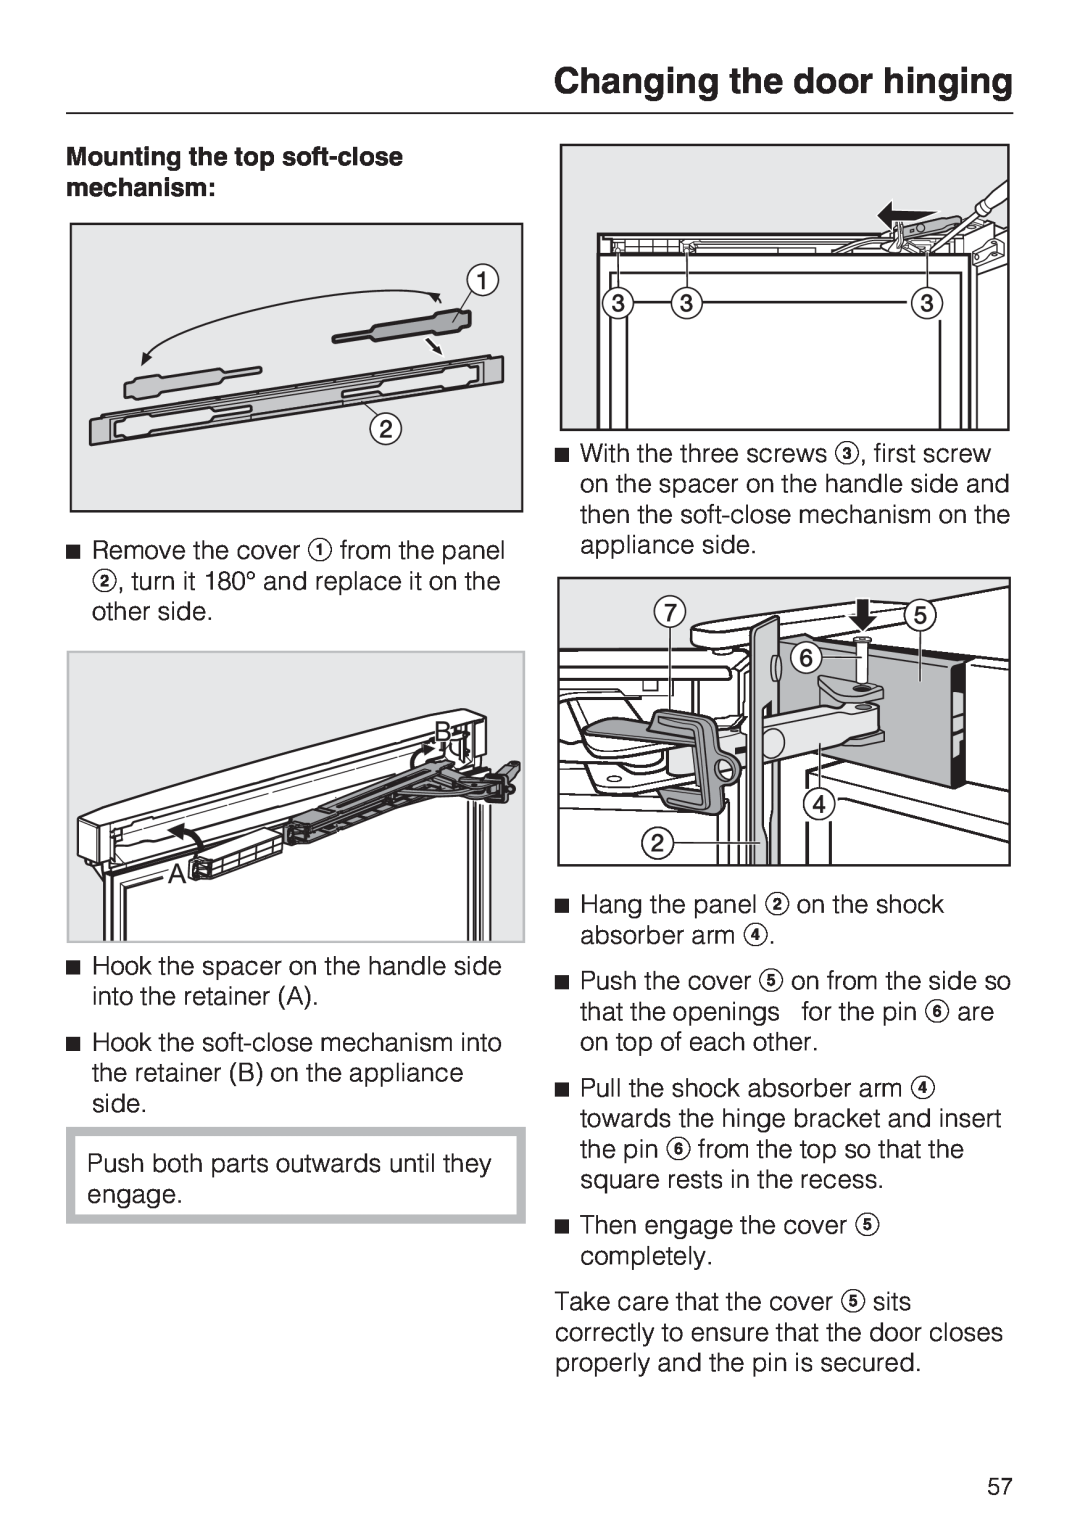 Miele KFN 14943 SD ED installation instructions Mounting the top soft-closemechanism, Changing the door hinging 